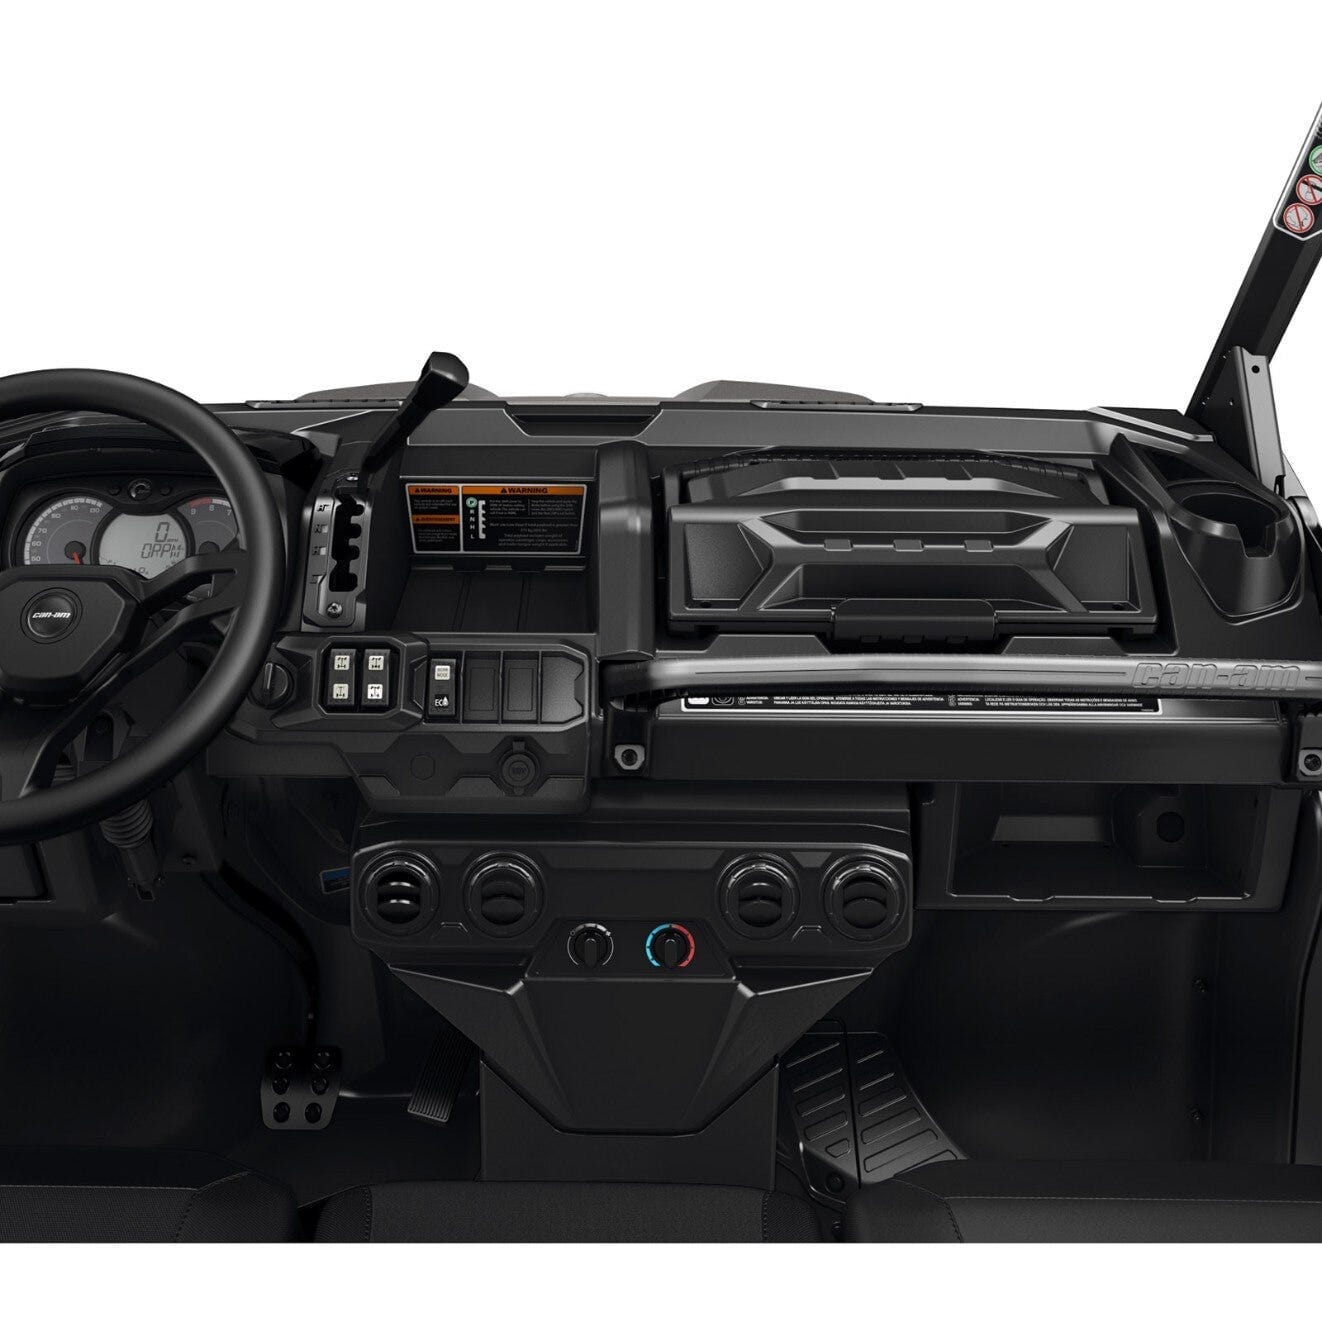 Lower Dashboard for Heating System - Propowersports.ca